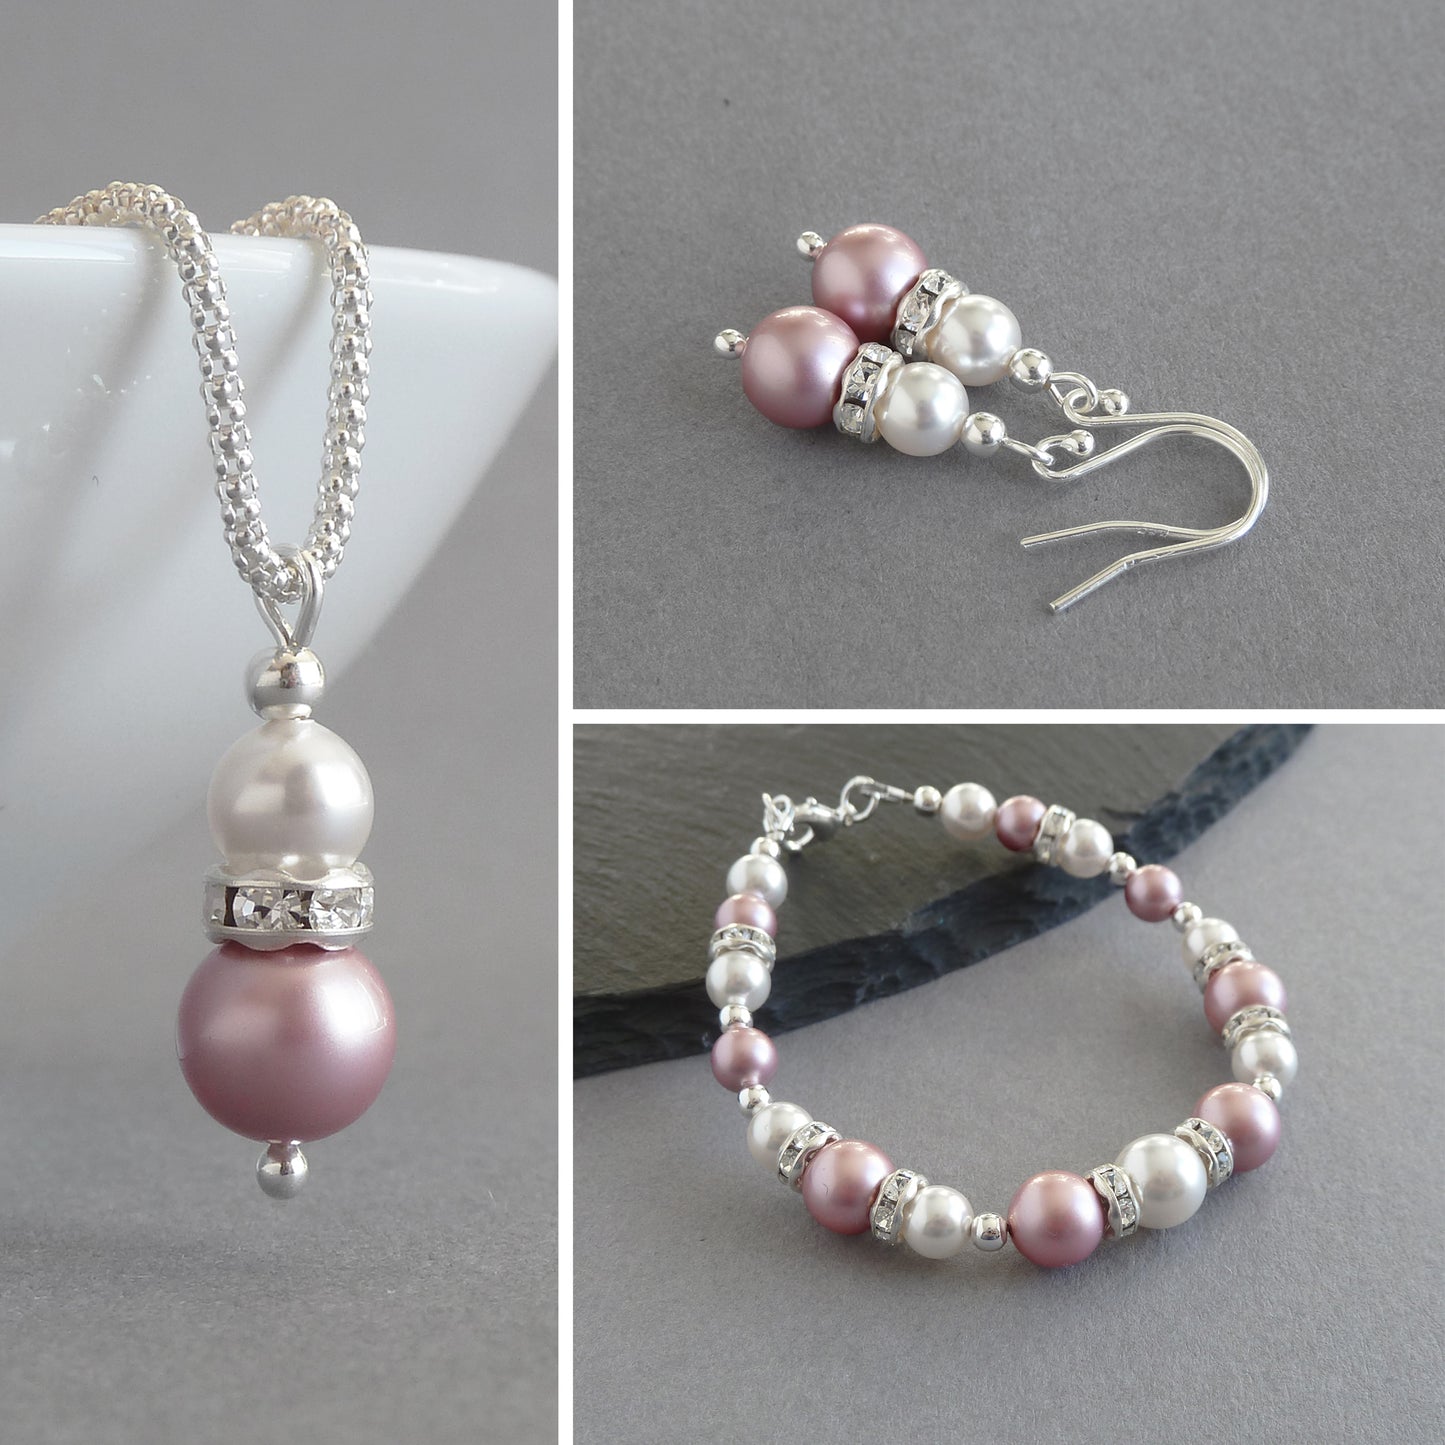 Dusky pink pearl jewellery set from Anna King Jewellery